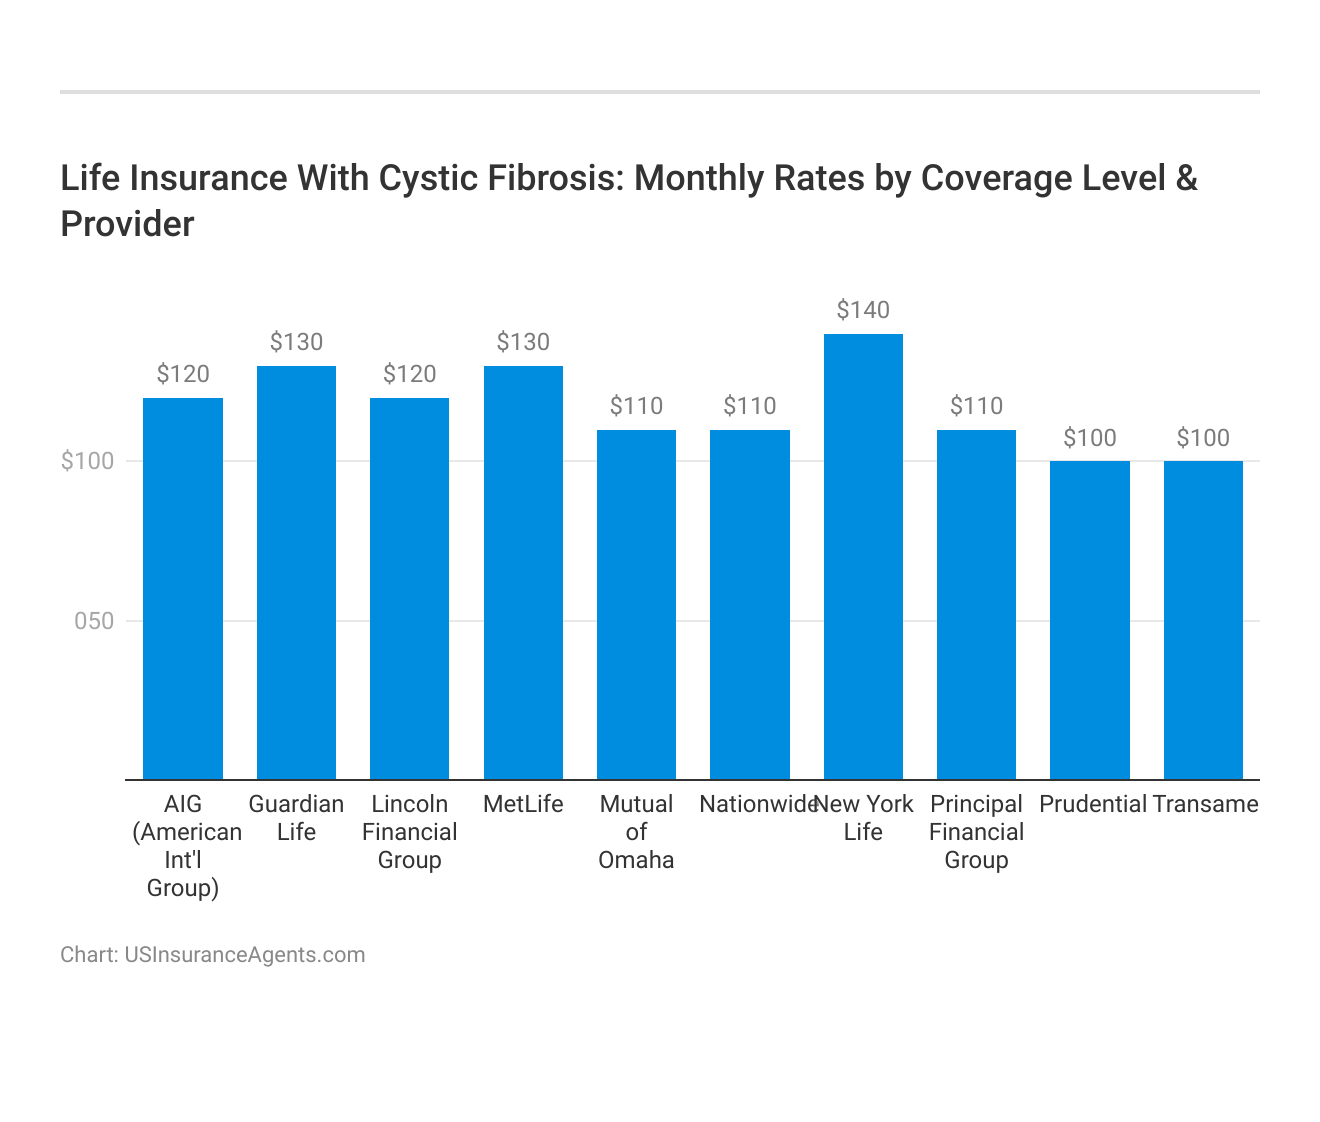 <h3>Life Insurance With Cystic Fibrosis: Monthly Rates by Coverage Level & Provider</h3>